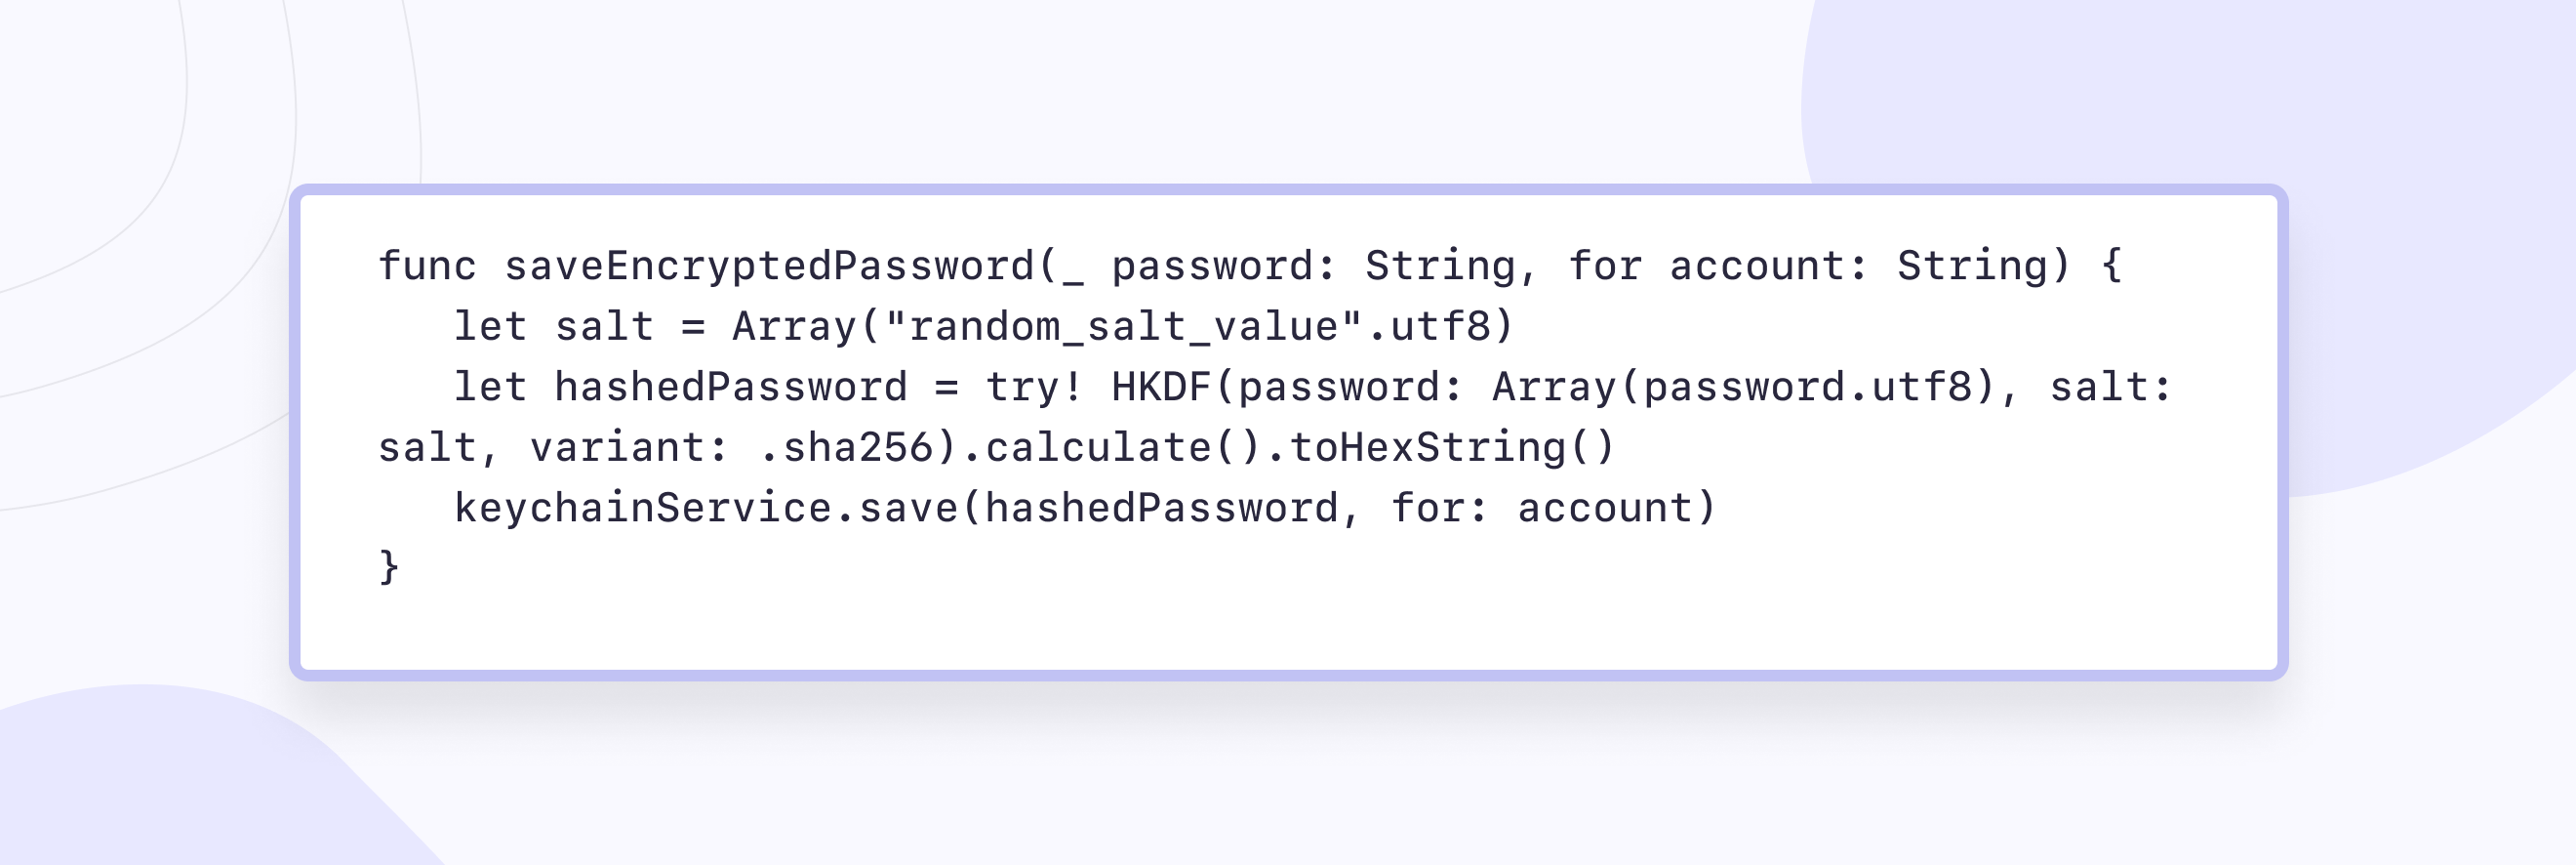 Storing and retrieving passwords securely from Keychain using CryptoSwift algorithms